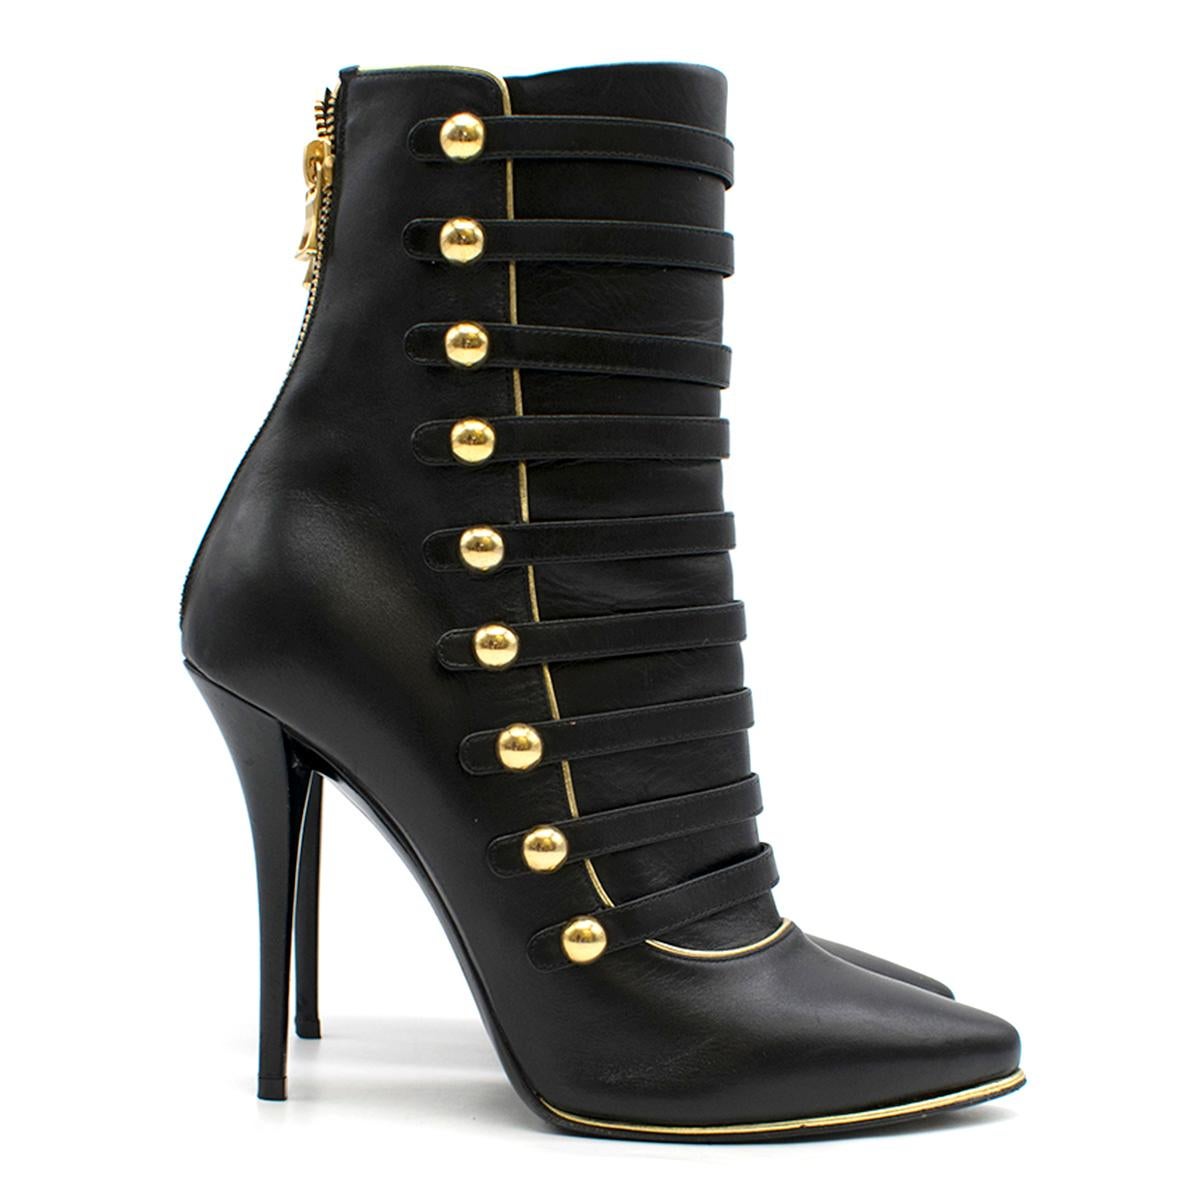 Balmain Black Leather Ankle Boots

- Black leather ankle boots
- 110mm stiletto heels
- Pointed collar
- Centre-back zip fastening
- Front multi-strap feature with gold-tone metal detail
- Black leather lining with logo embroidered

Please note,